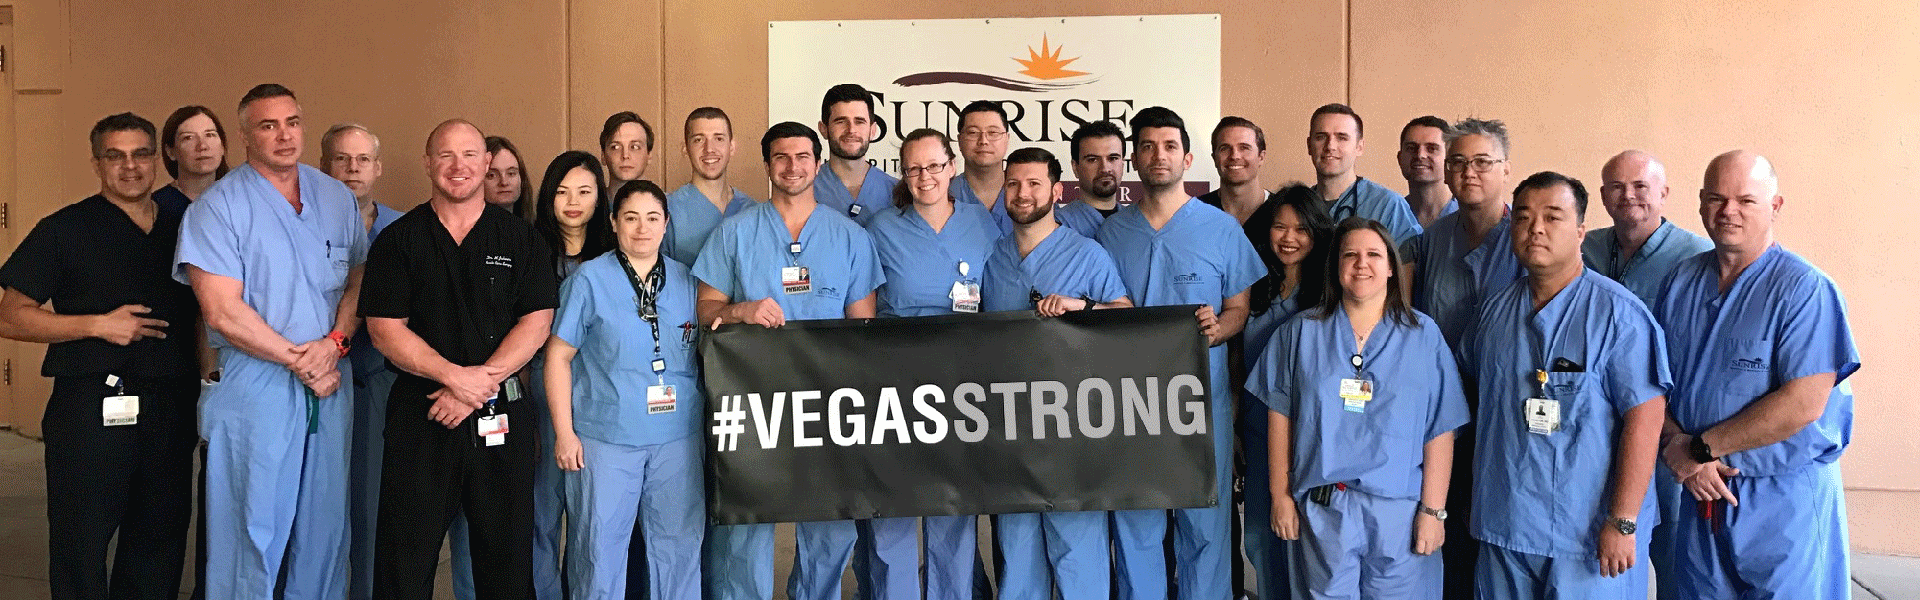 Hospital staff with Vegas Strong banner